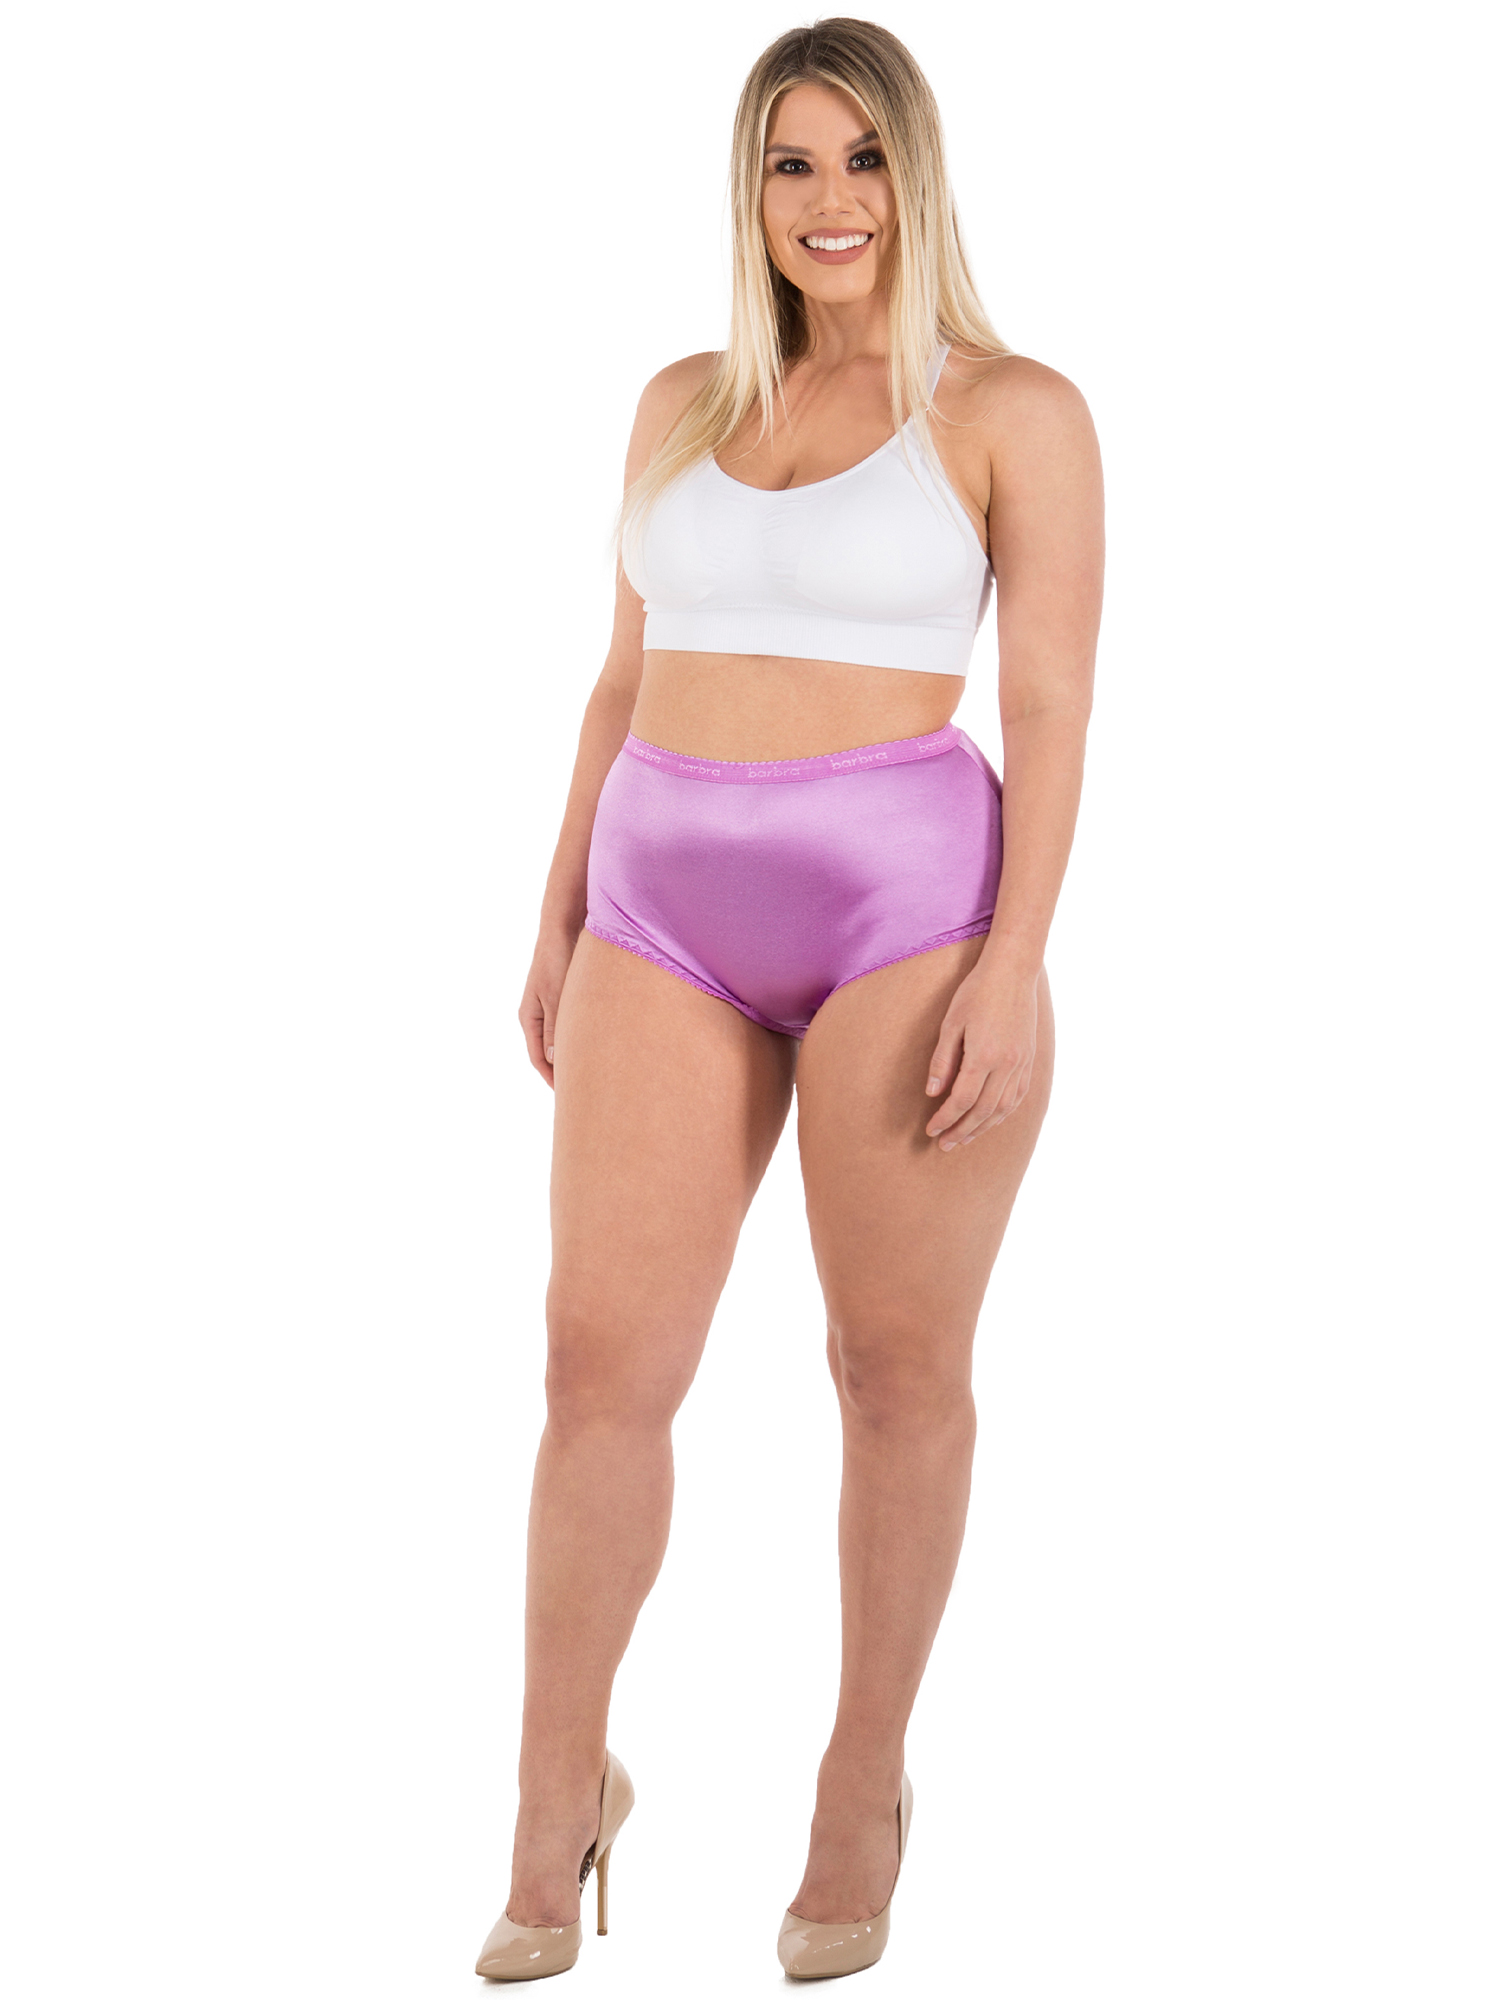 Satin Panties S To Plus Size Womens Underwear Full Coverage Brief 6 Pack Ebay